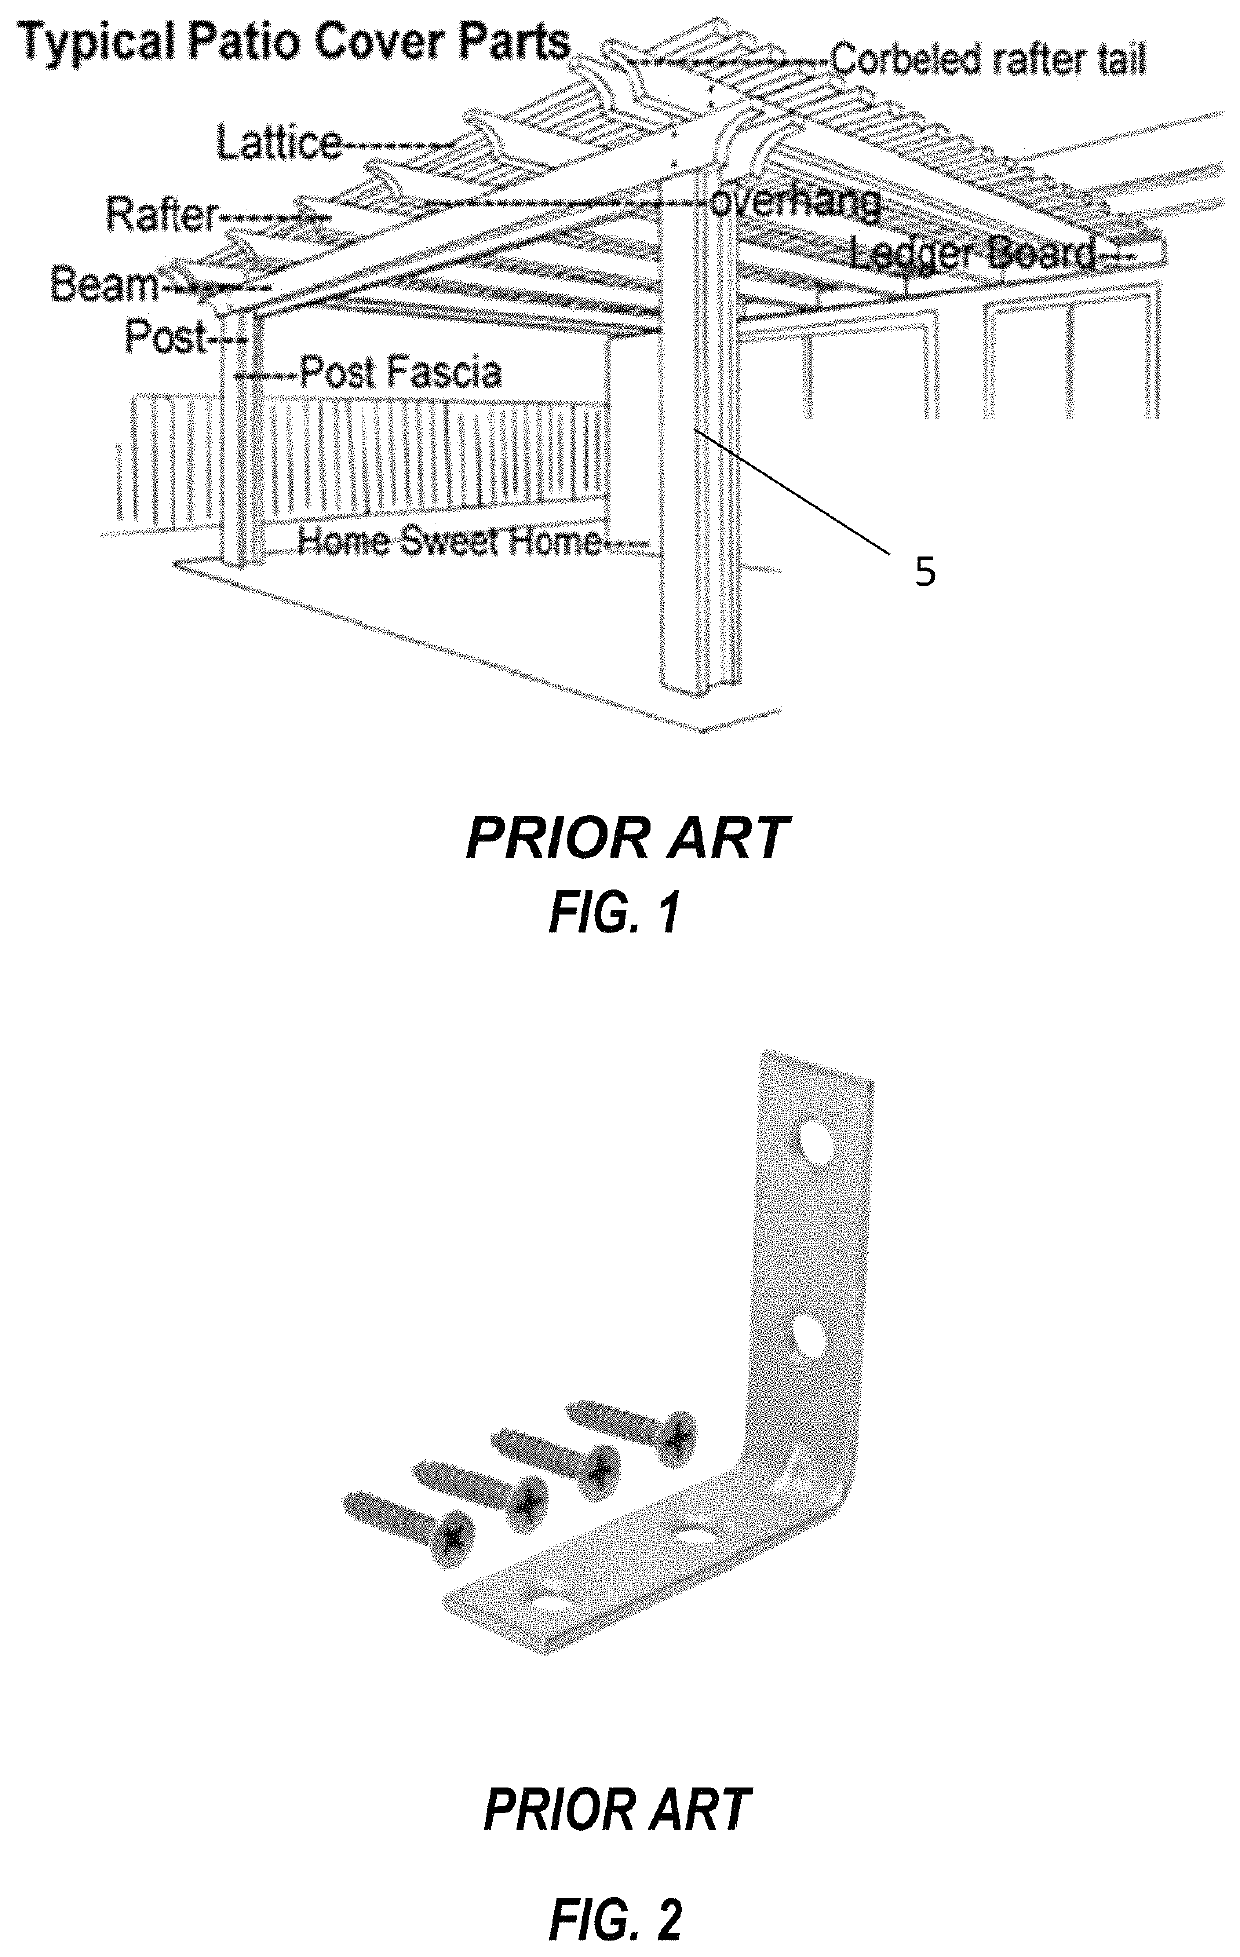 Adjustable brackets for installing building attachments